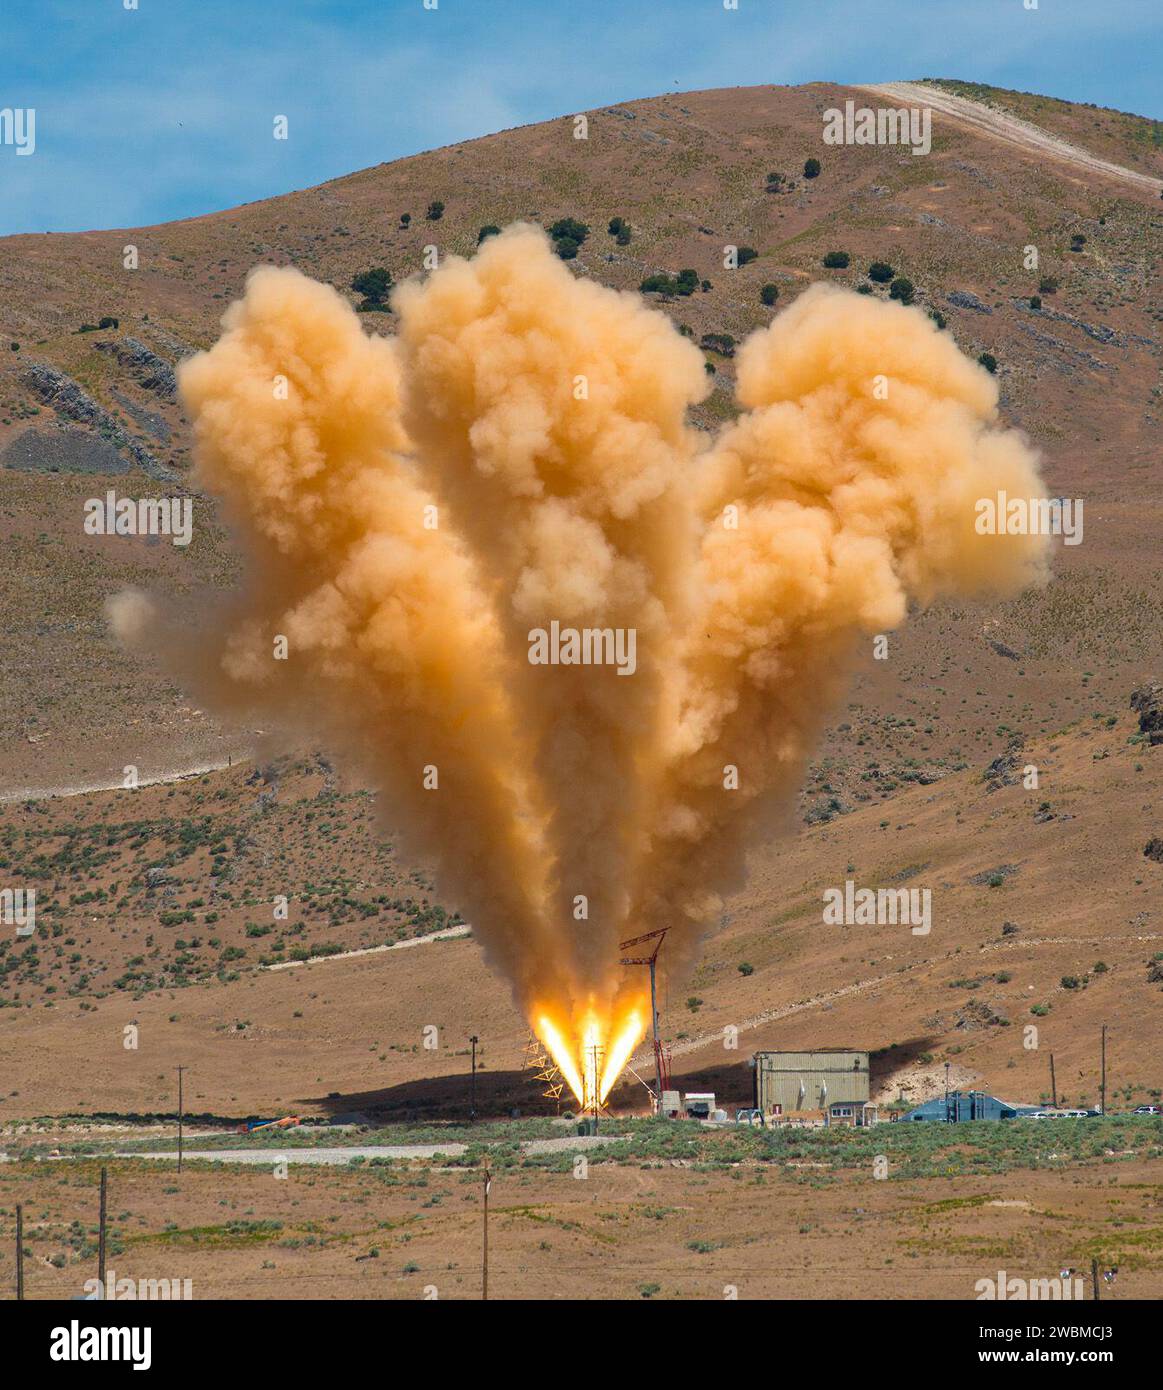 The abort motor for Orion’s launch abort system fired for five seconds in a test at the Promontory, Utah facility of manufacturer Orbital ATK on June 15, 2017. Part of Batch images transfer from Flickr. Stock Photo